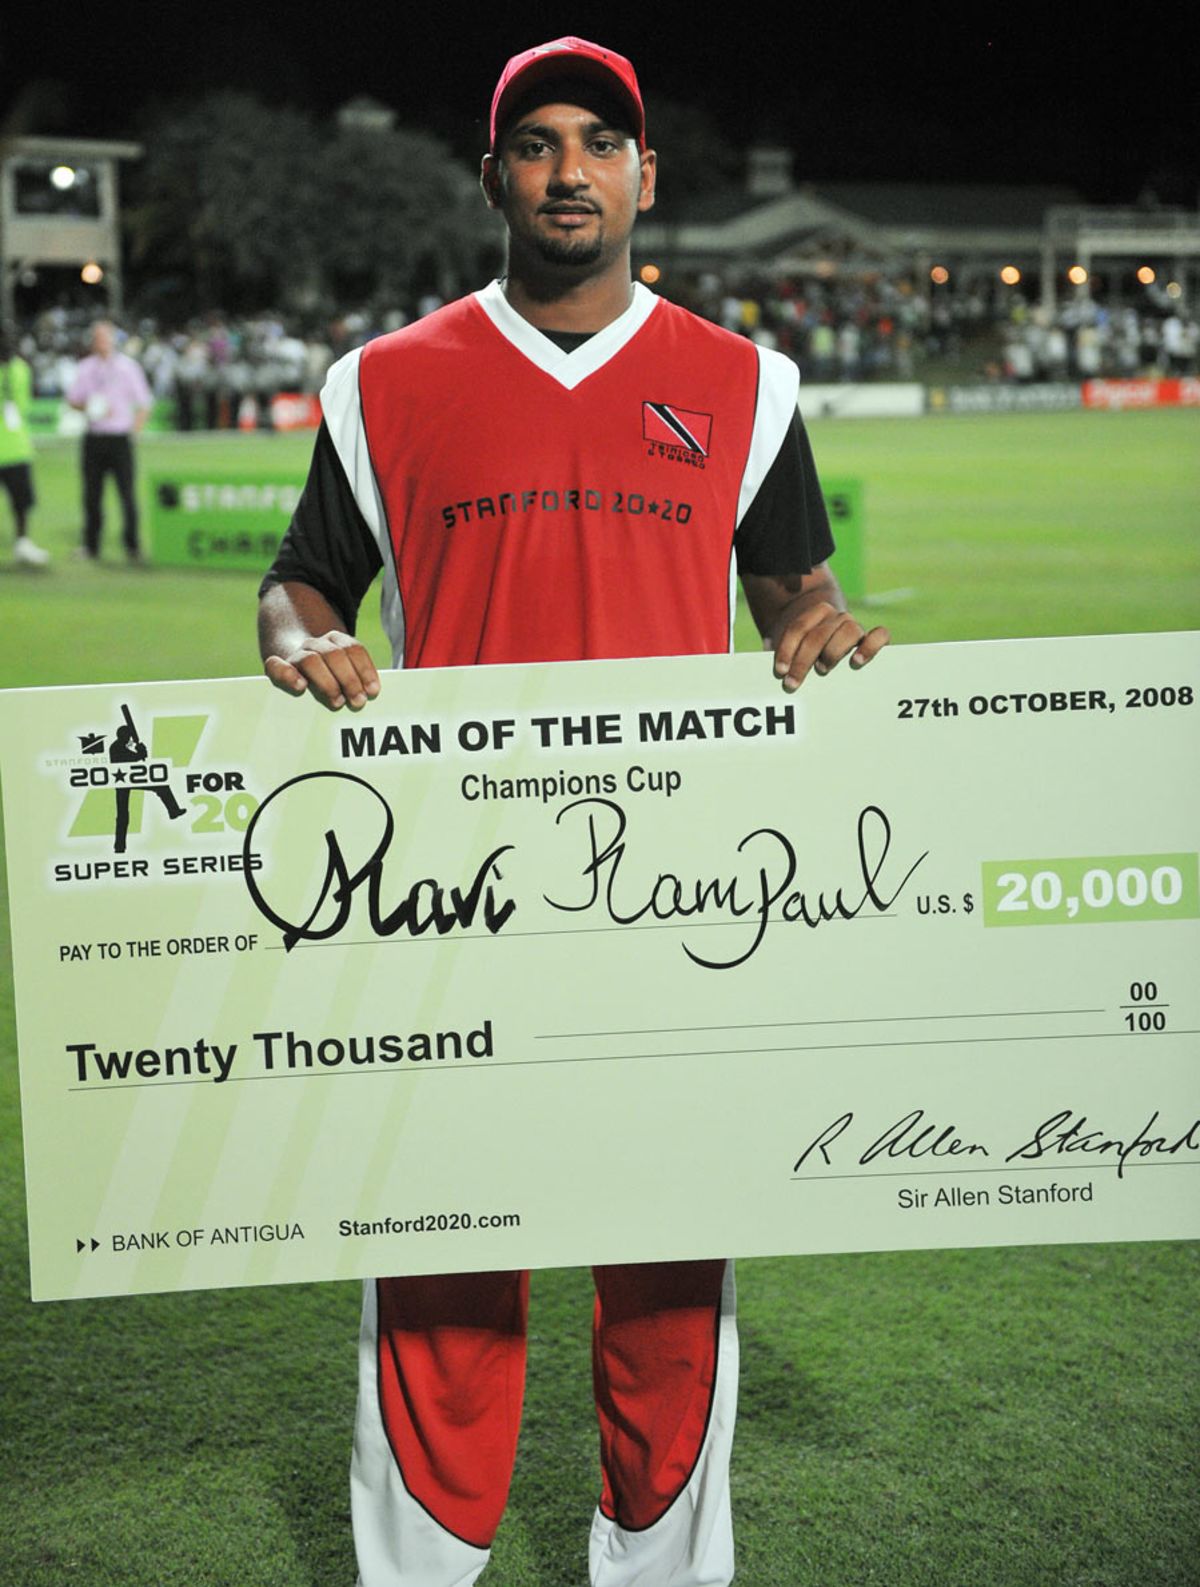 Ravi Rampaul with his Man-of-the-Match cheque, Trinidad & Tobago v Middlesex, Stanford 20/20, Antigua, October 27, 2008